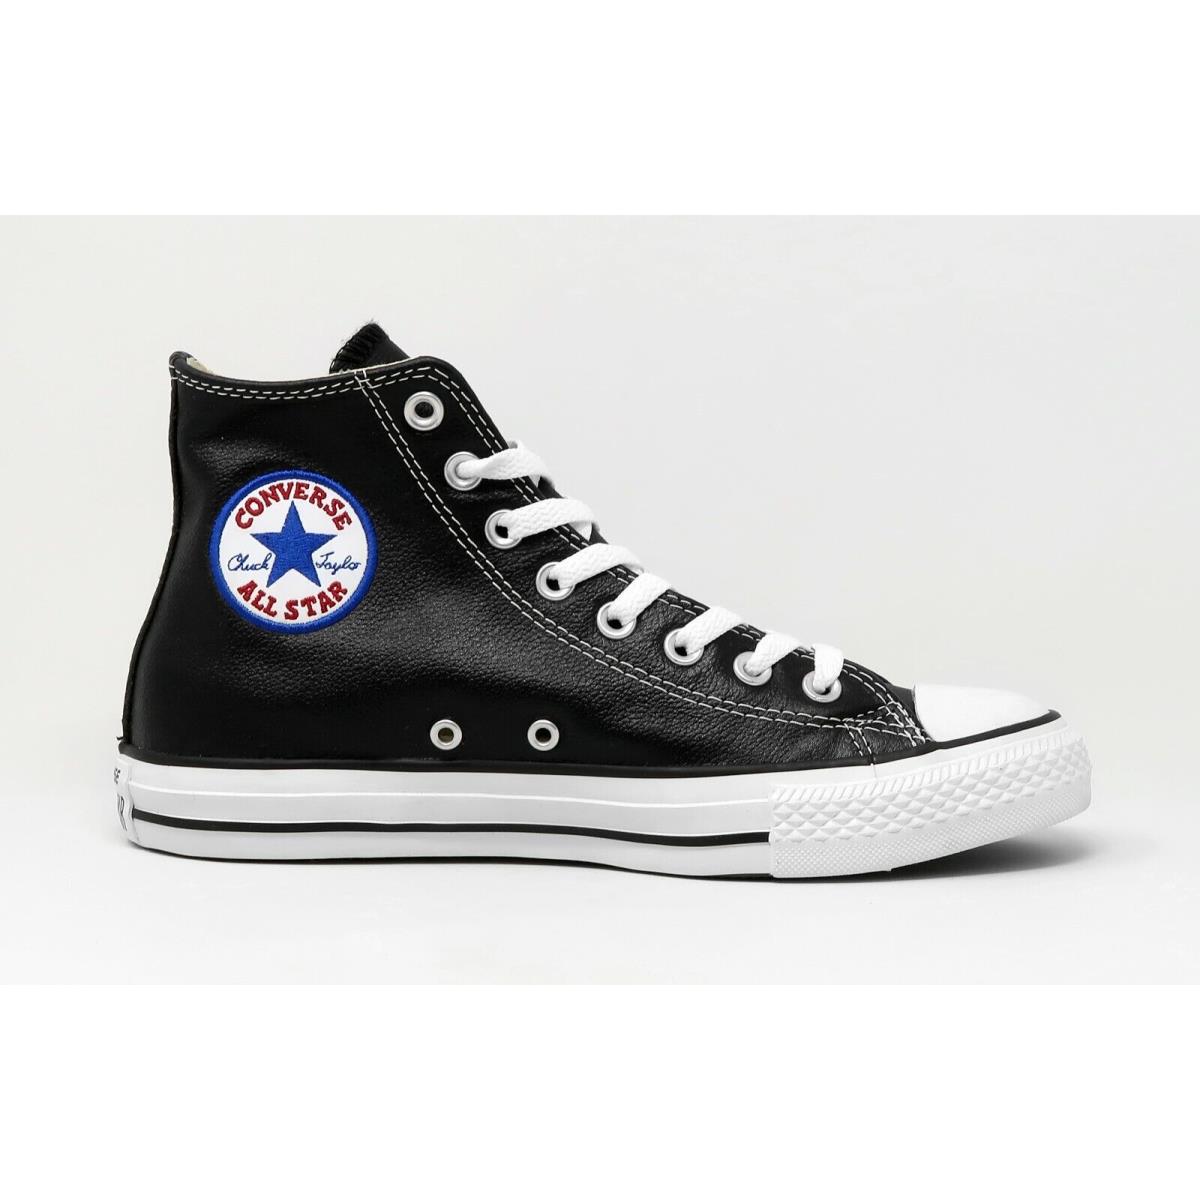 Converse All Star Hi Black Leather Shoes Men Women Sneakers